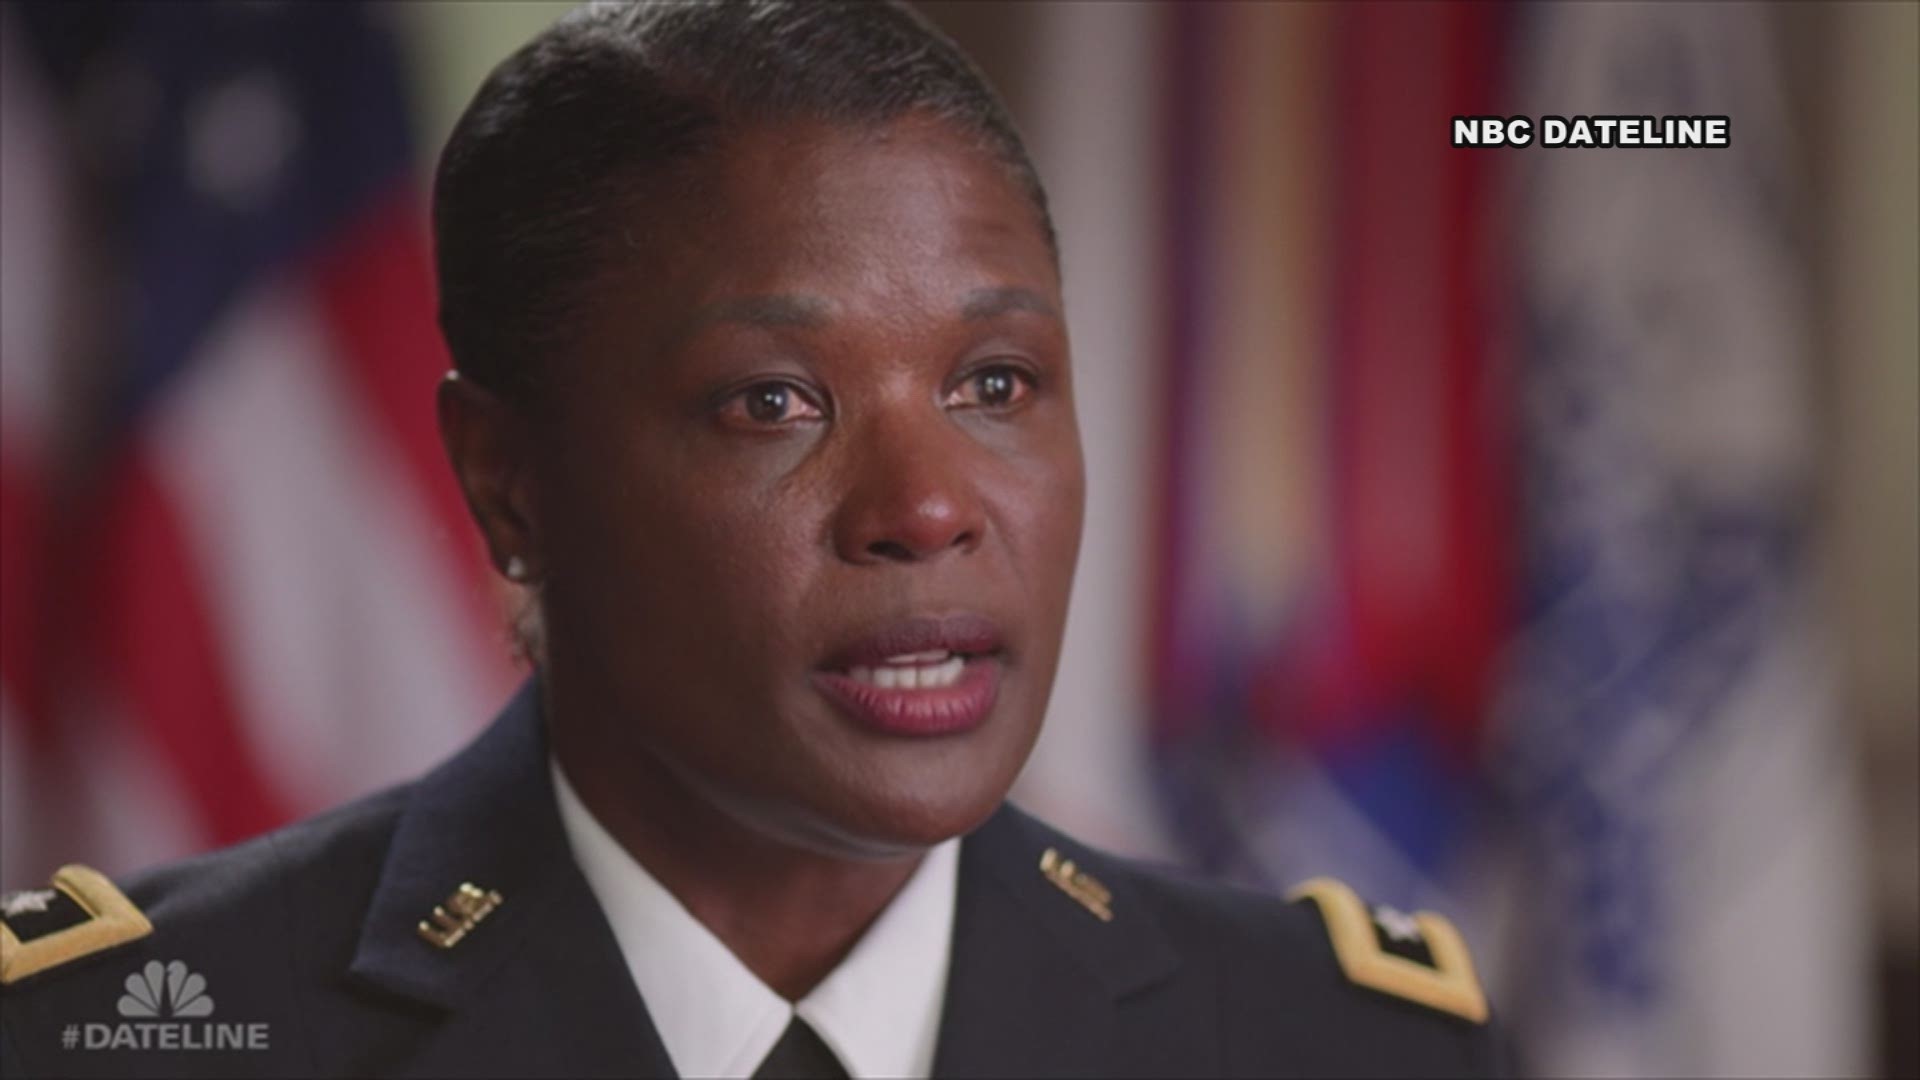 Army CID Major General Donna Martin sat down with NBC Dateline to speak about the case of murdered Fort Hood solider Vanessa Guillen.